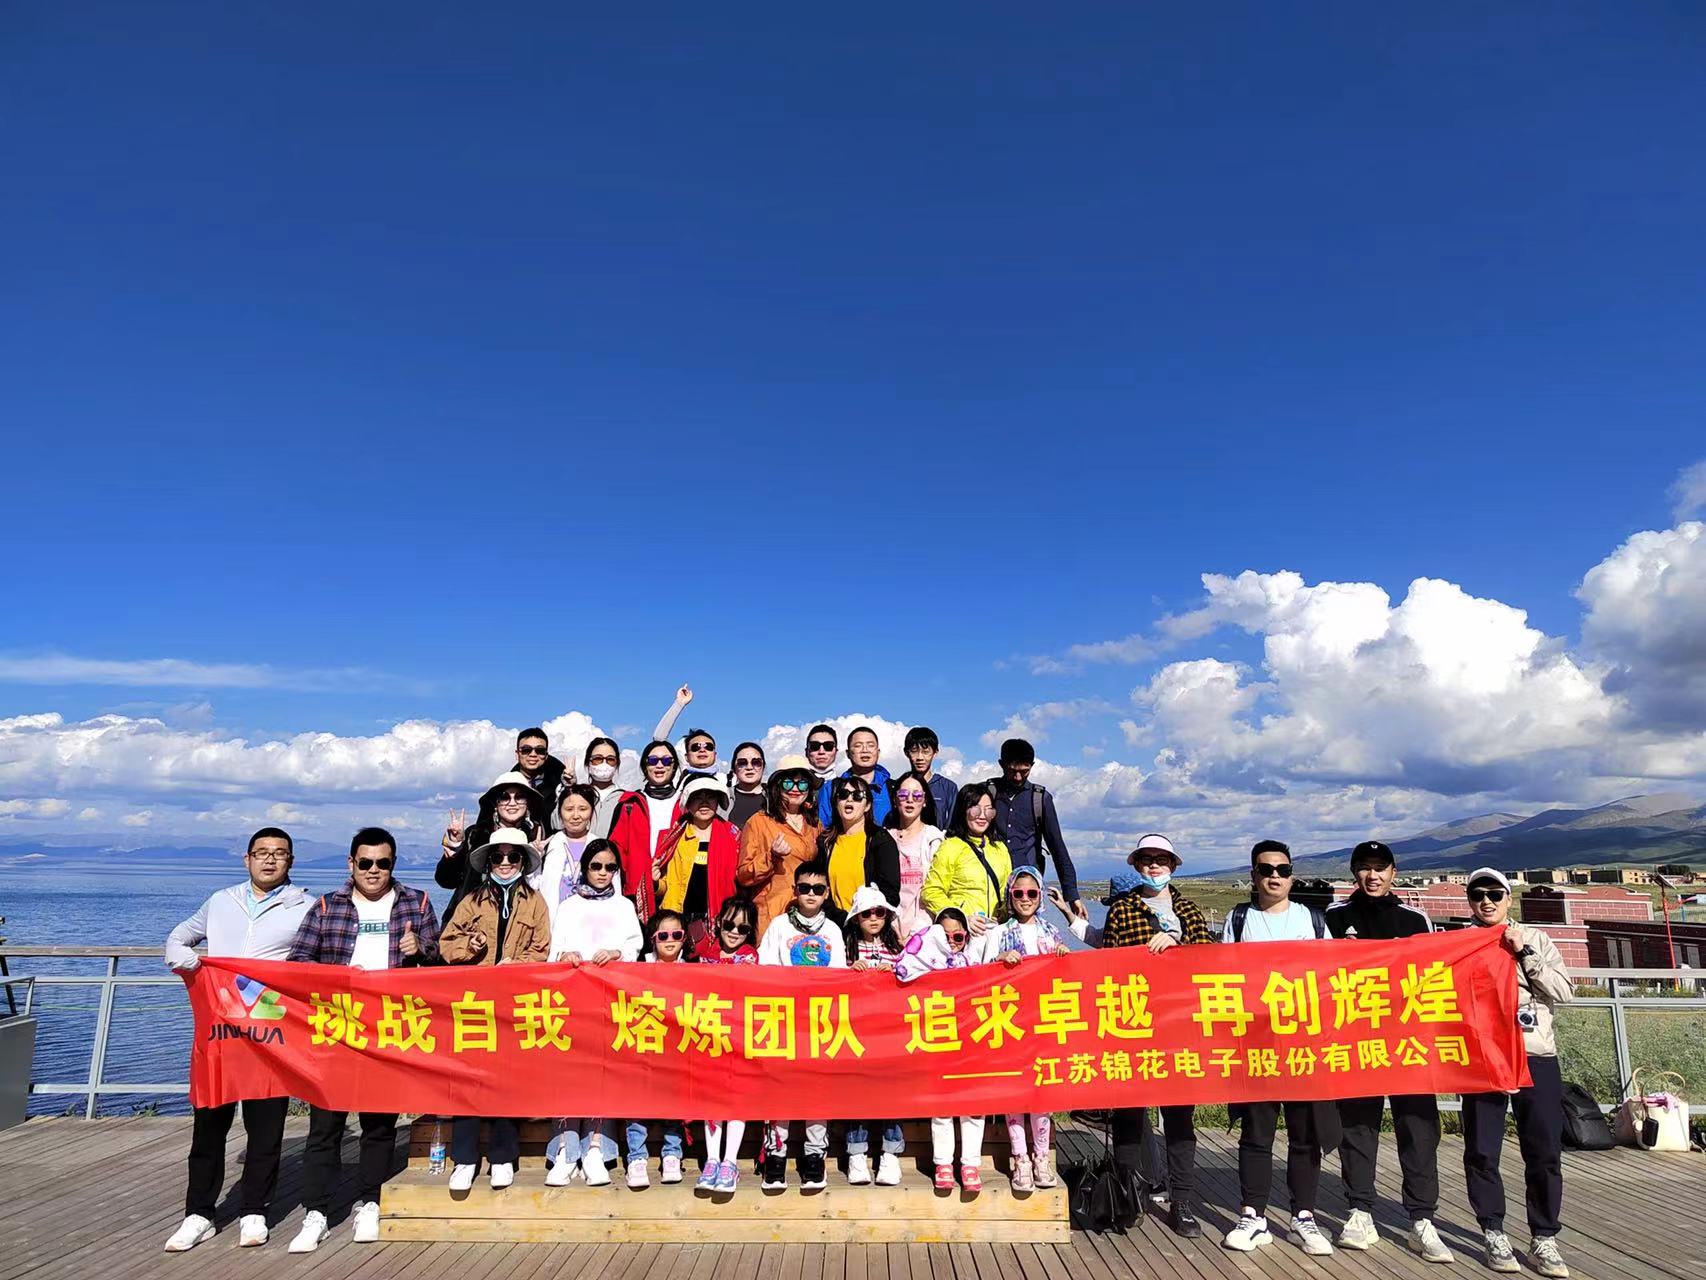 TEAMBUILDING!--Annual Tourism Of Visting Nothwest of China